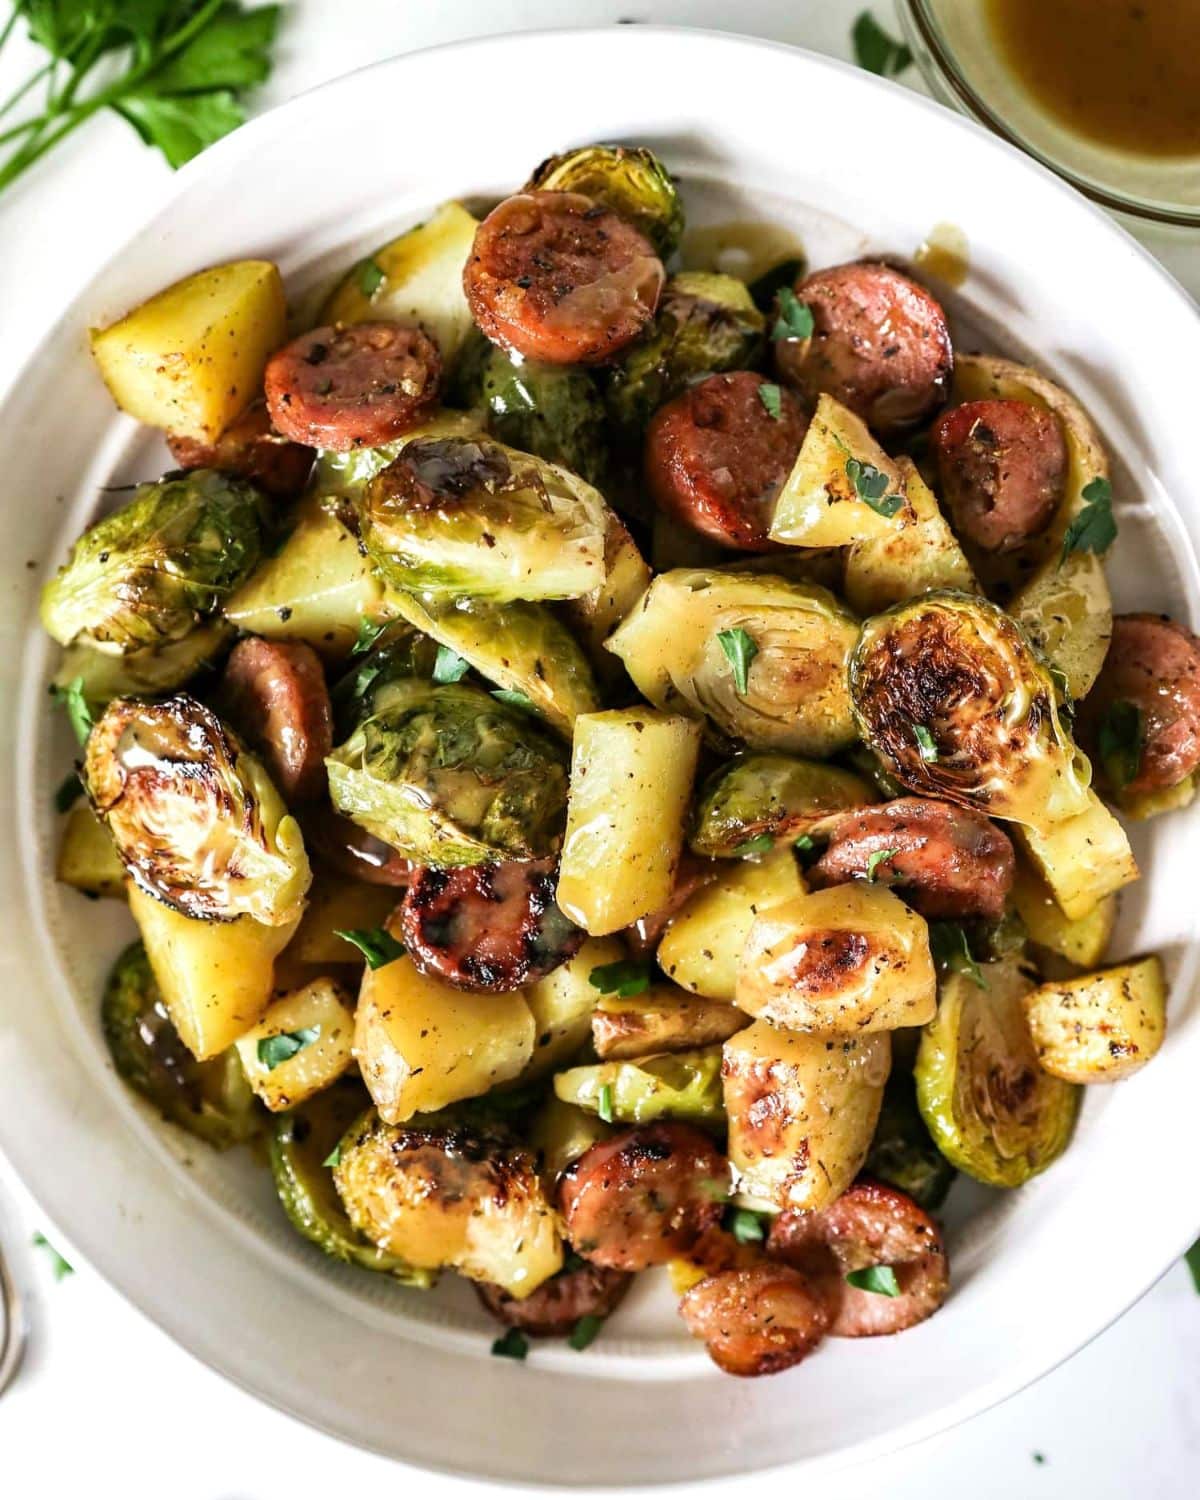 Healthy Sausage, Potatoes, and Brussels Sprouts in a white bowl.